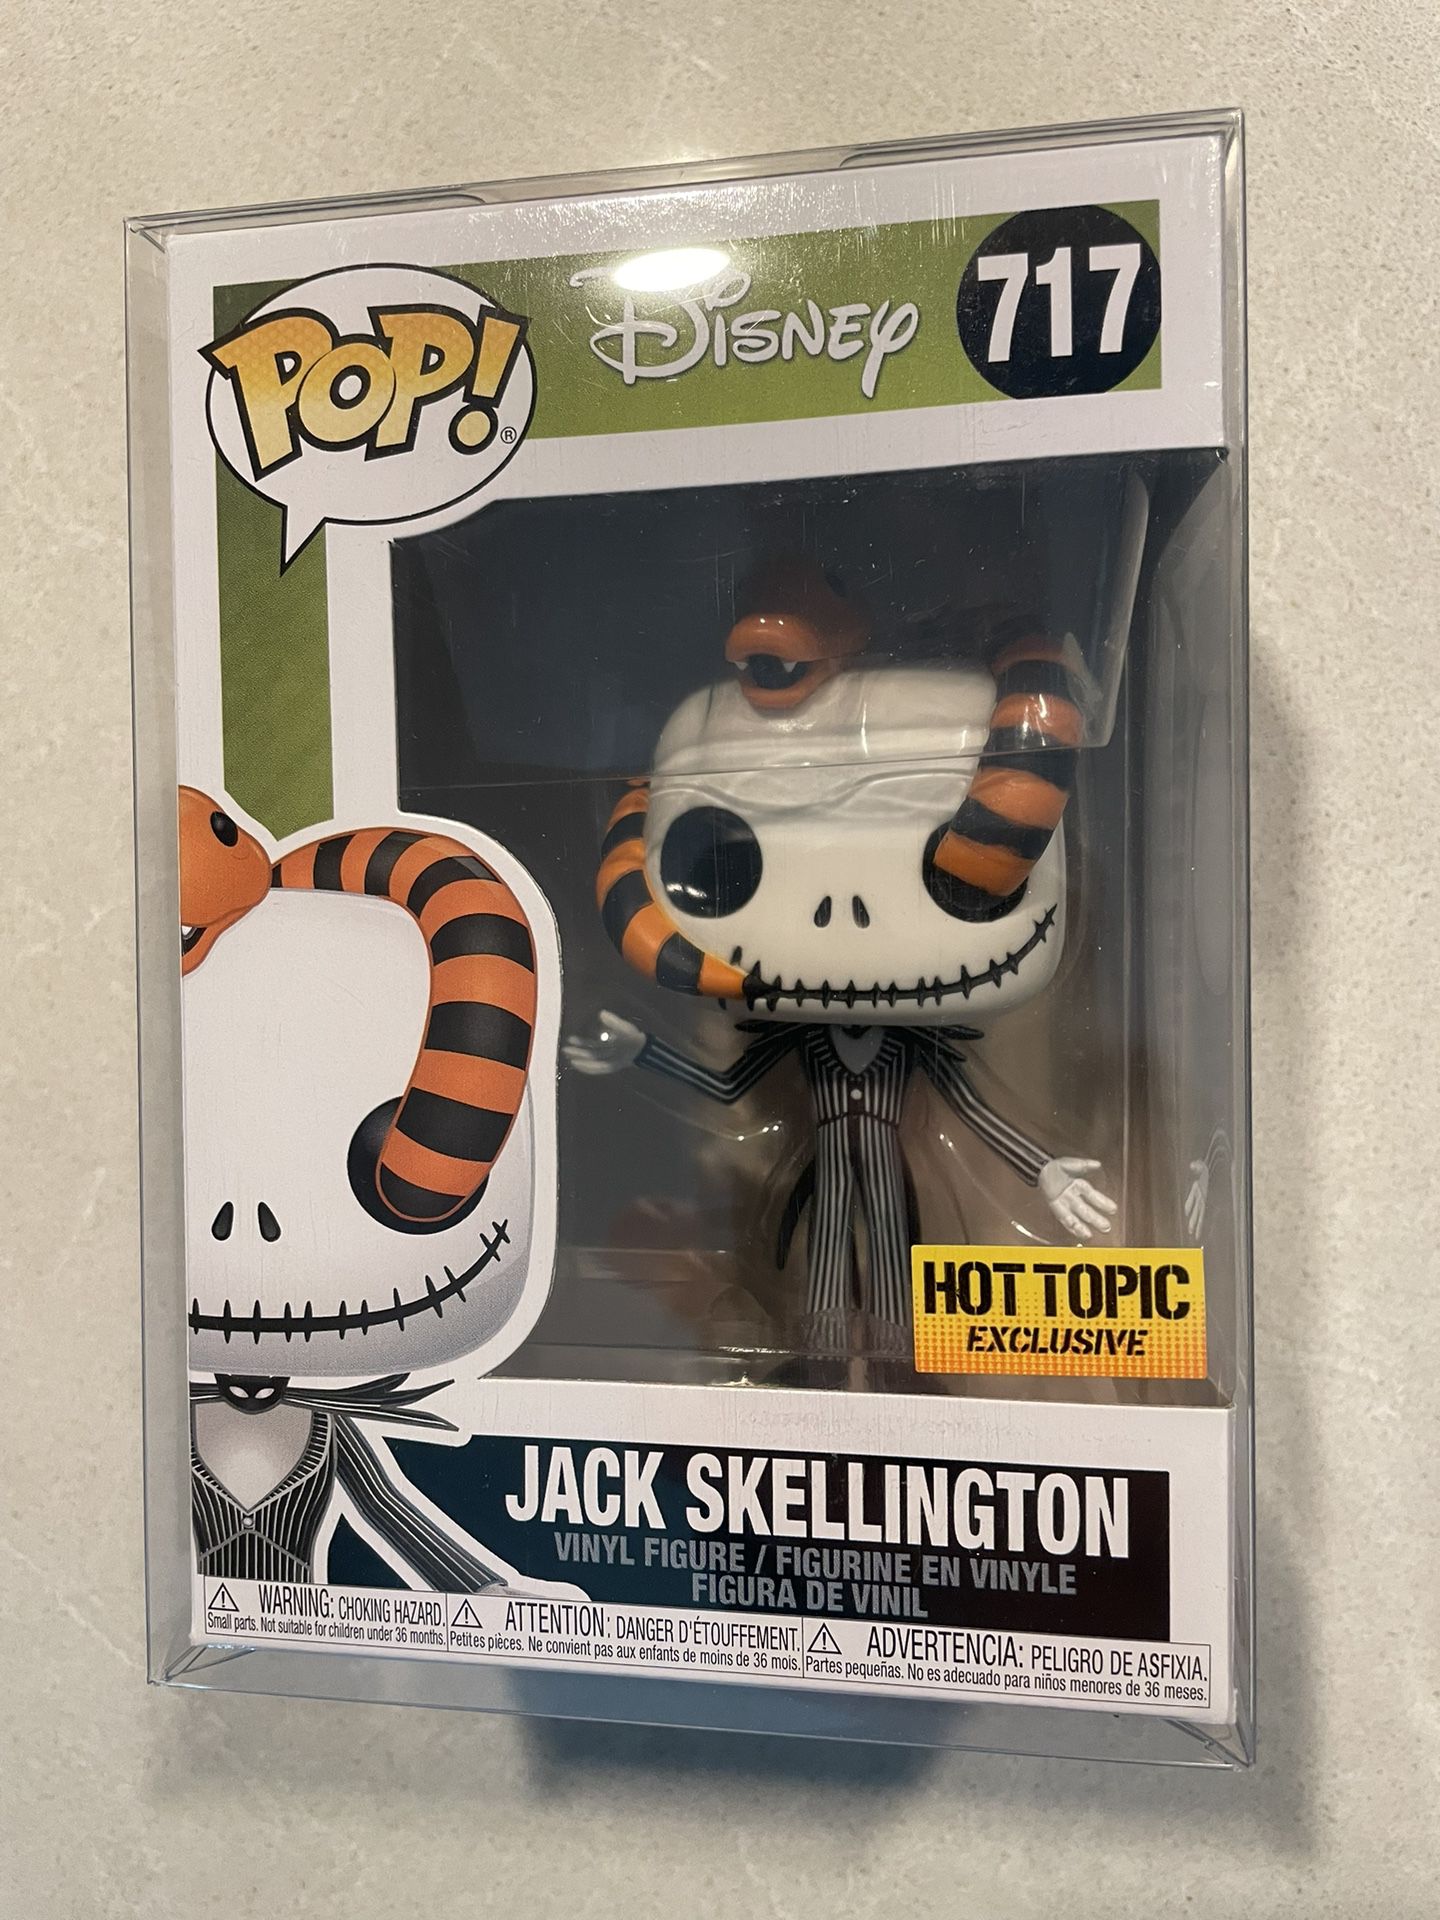 Jack Skellington Snake Eyes Funko Pop *MINT* Hot Topic Exclusive Disney Nightmare Before Christmas 717 with protector NBC